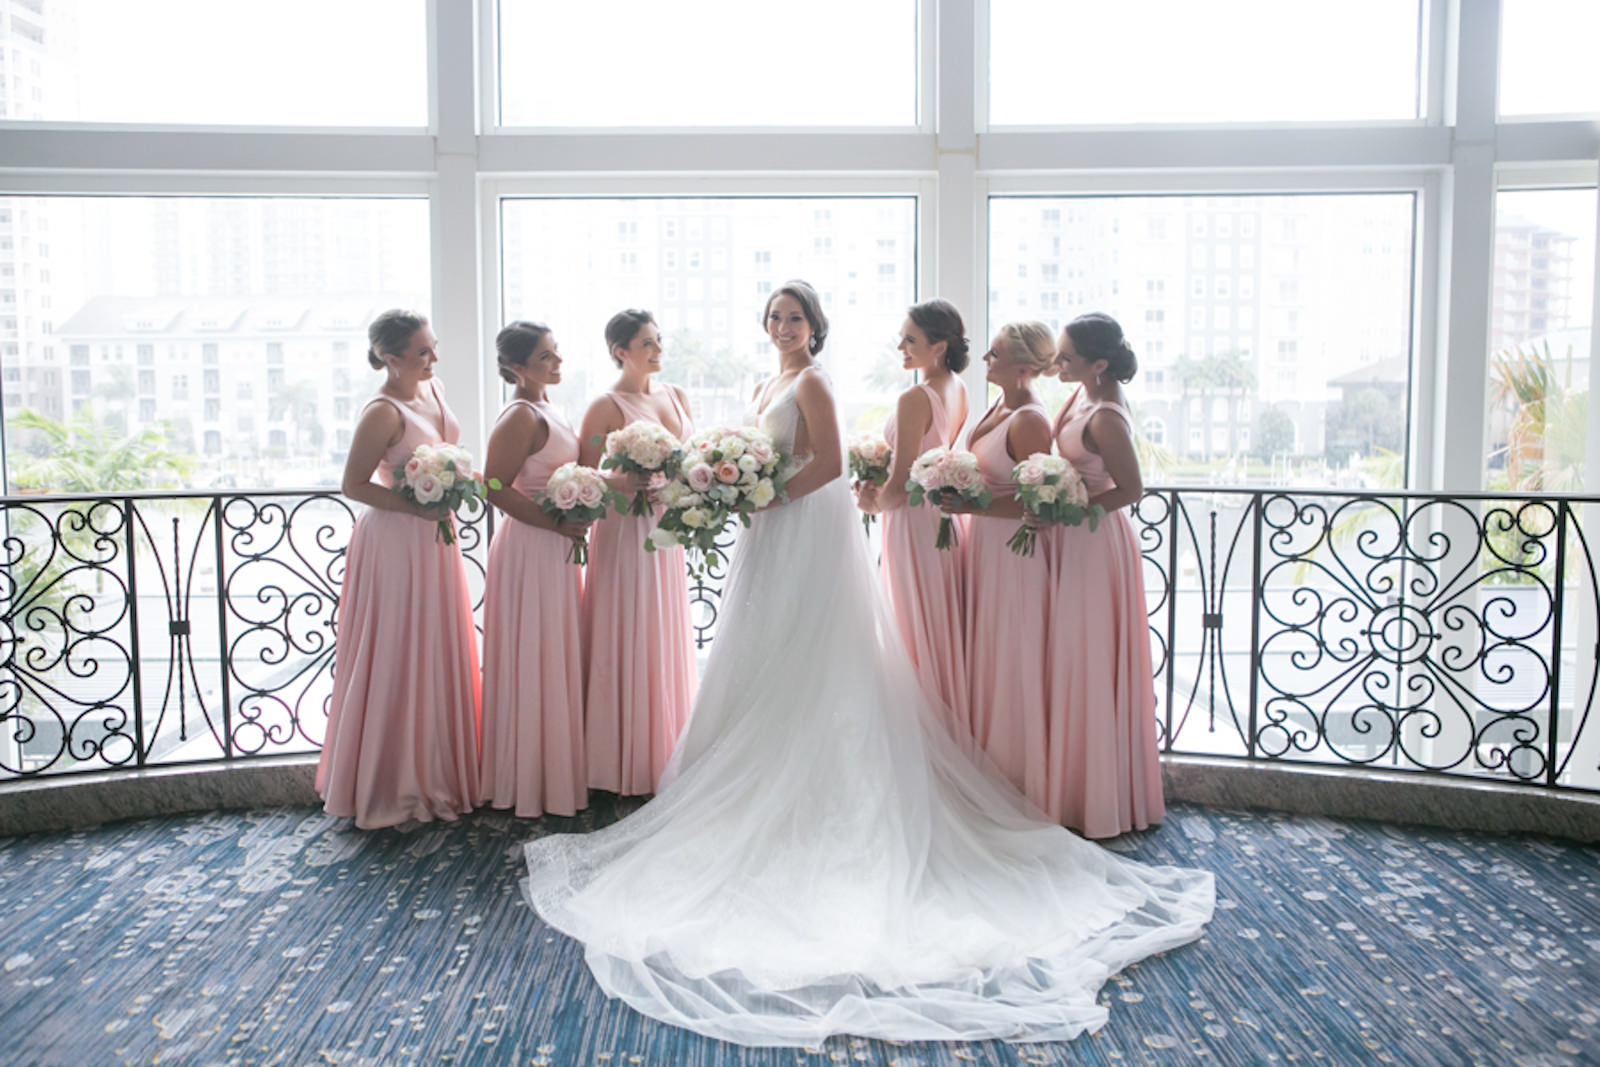 Indoor Downtown Tampa Hotel Window Bridall Party Portrait with Bride and Bridesmaids | V Neck Illusion Lace A Line Ballgown Wedding Dress with Rhinestone Waist Band and Cathedral Veil | Blush Pink and White Roses and Peonies Wedding Bridal Bouquets | Blush Pink Long Silk Satin Formal Bridesmaid Dresses